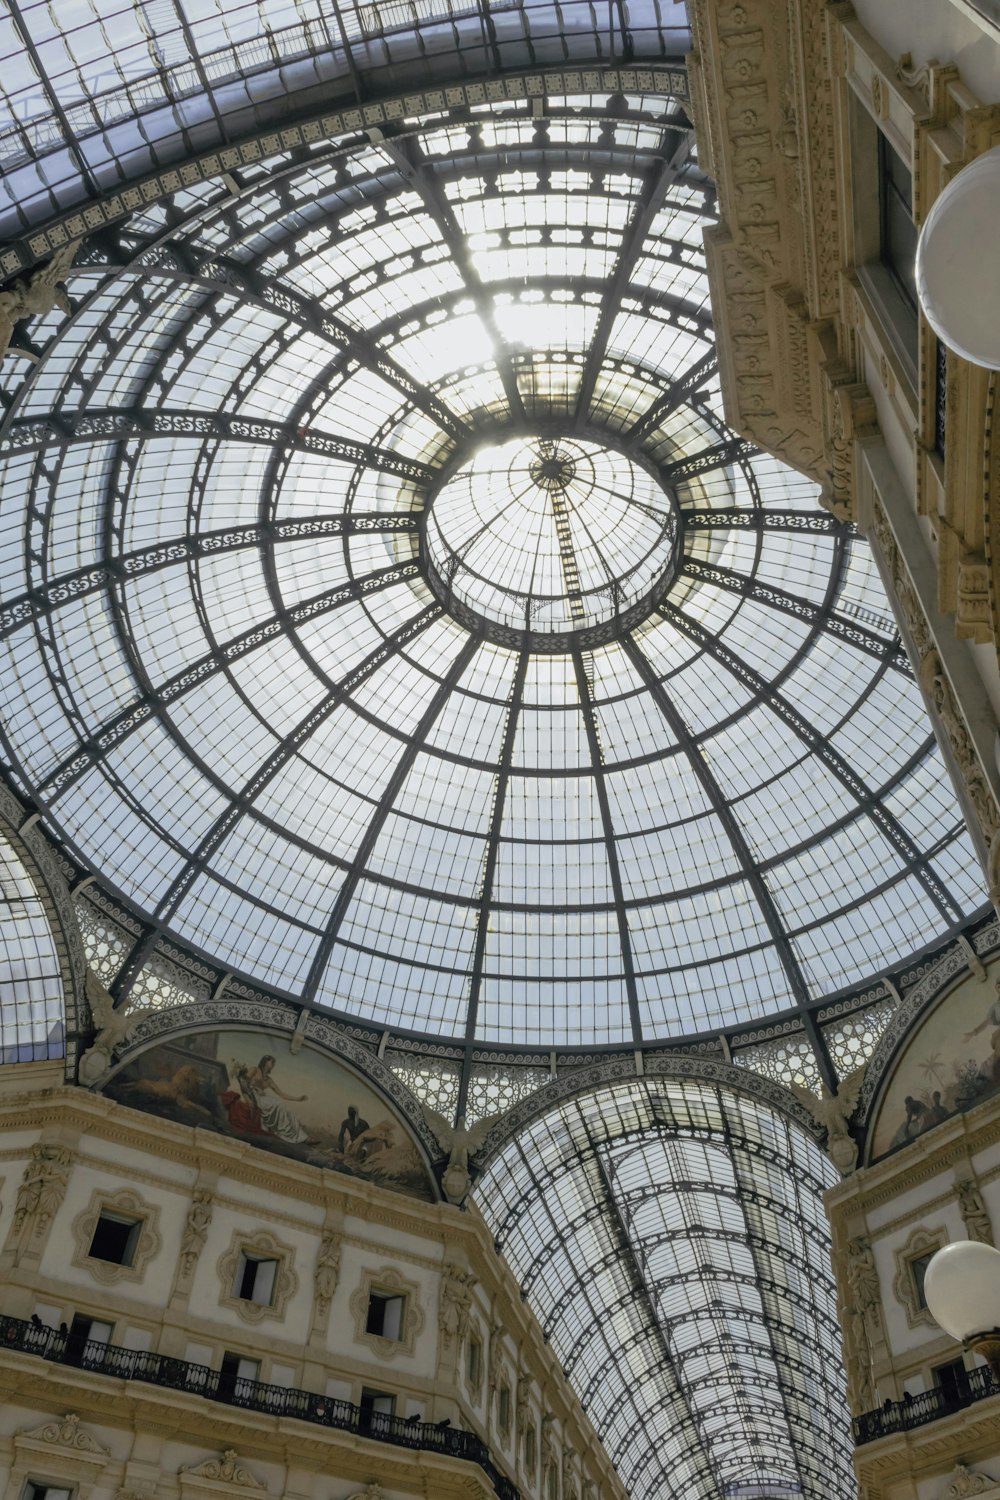 a large domed ceiling with a glass dome